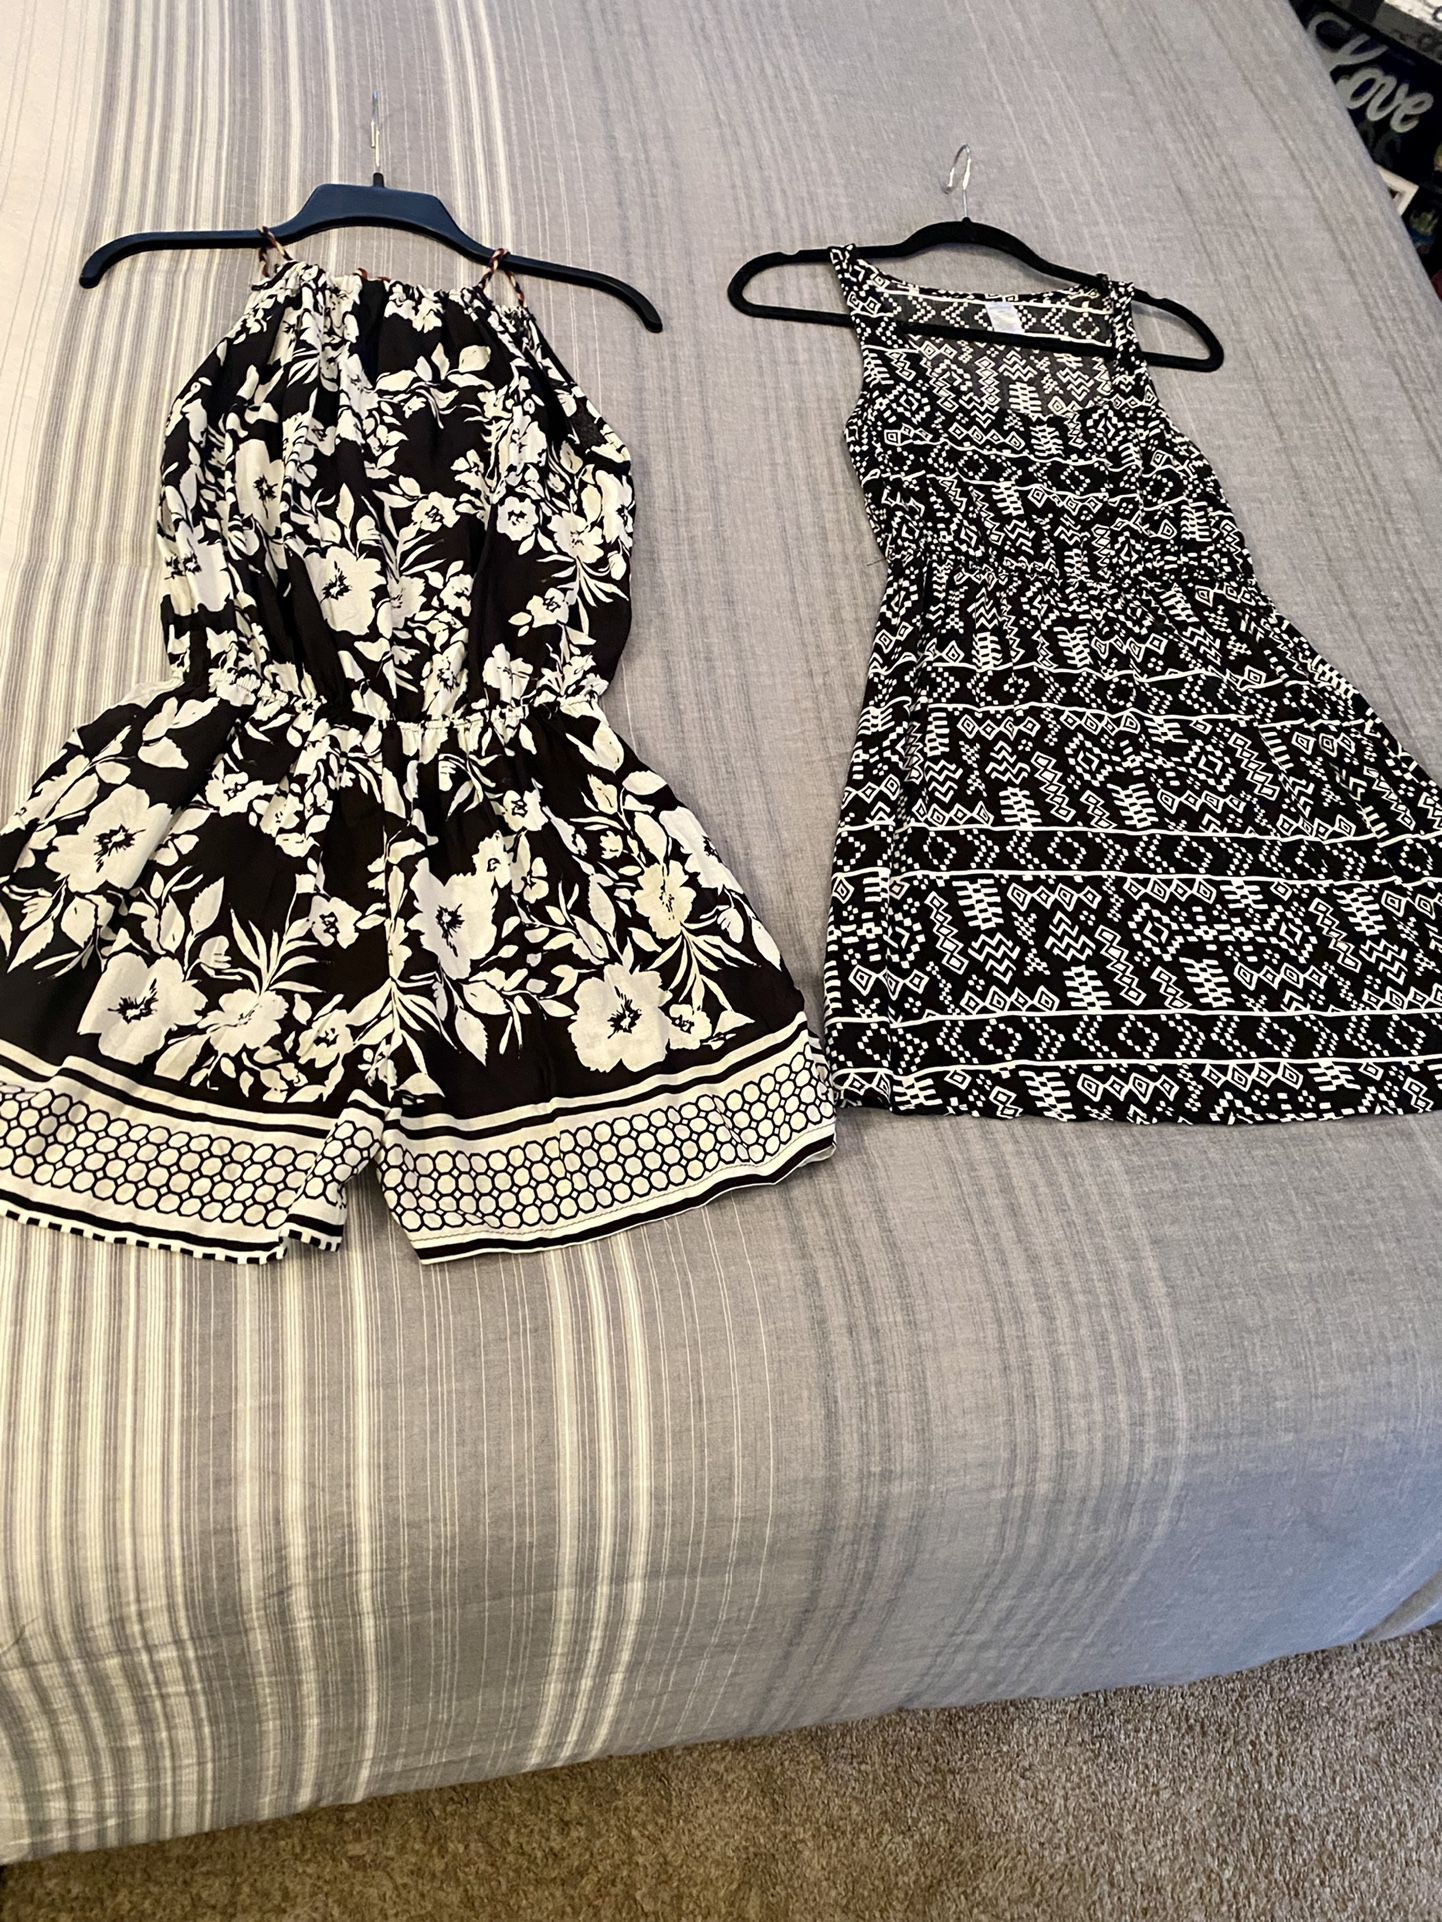 Ladies Size Small Black & White Romper -AND- Summer Dress